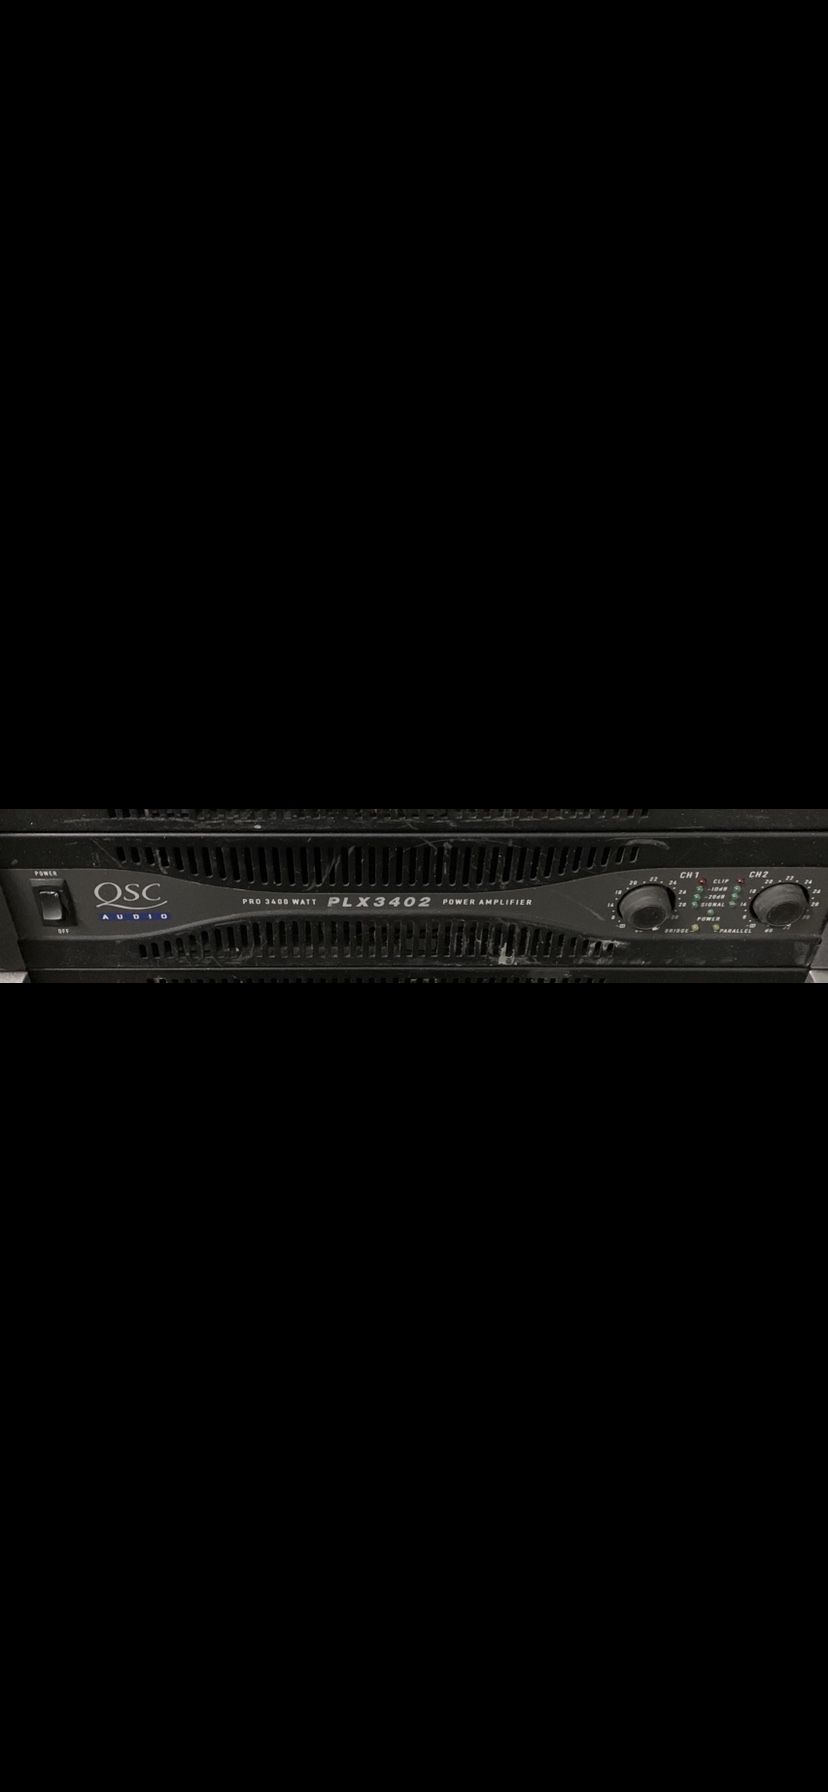 Qsc plx 3402... 3 available...$400 per amp shipping cost tbd.